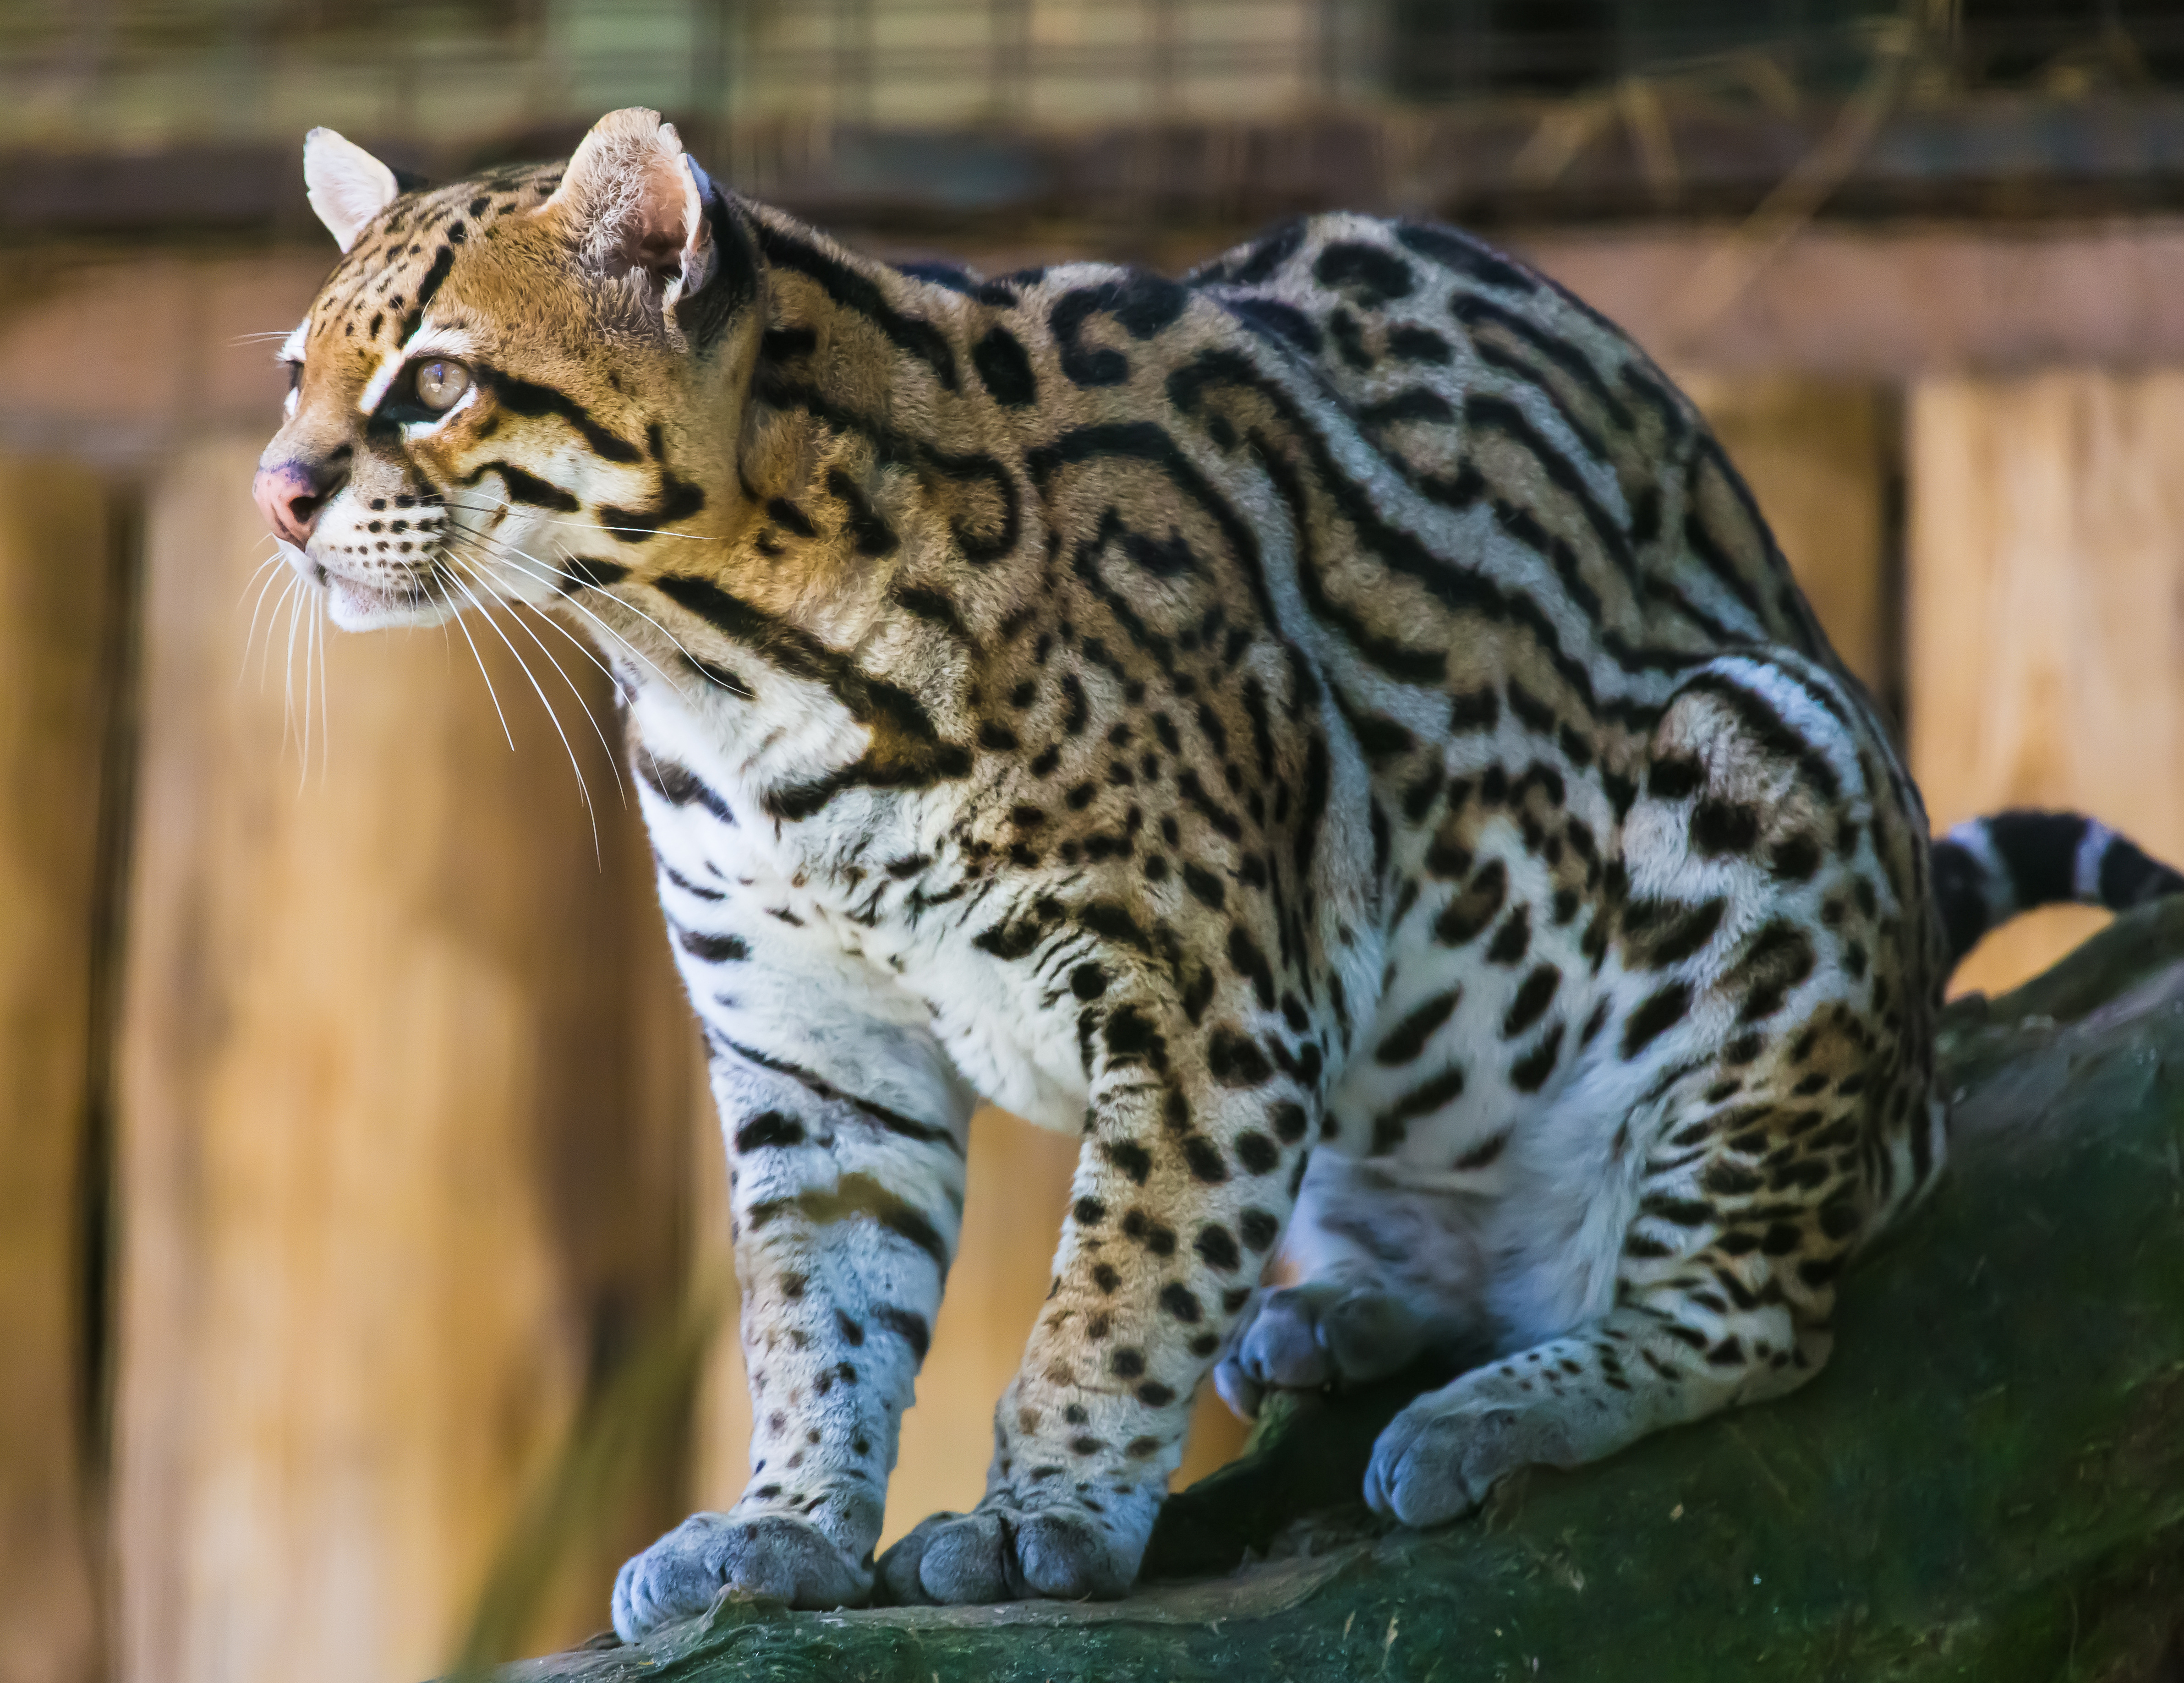 What family does an ocelot belong to?